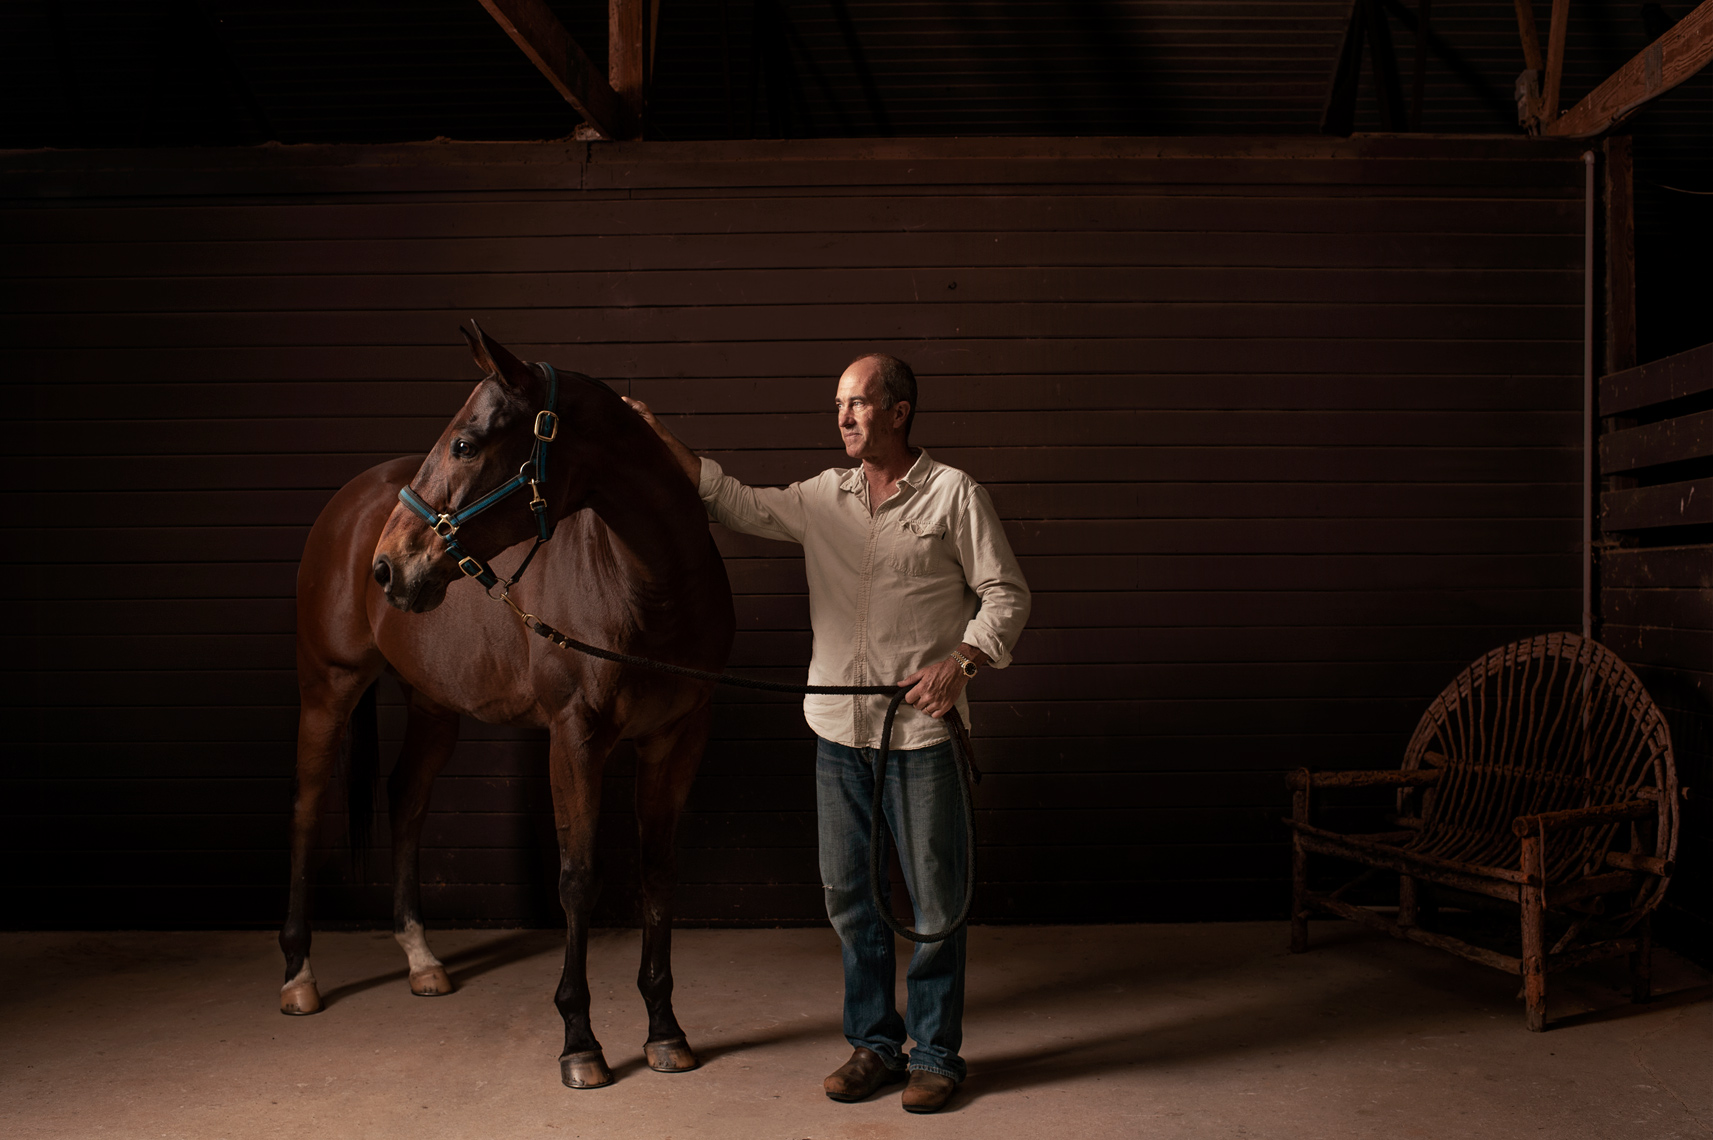 Ten Goal American Polo player Adam Snow & one of his prize polo ponies stand for a portrait